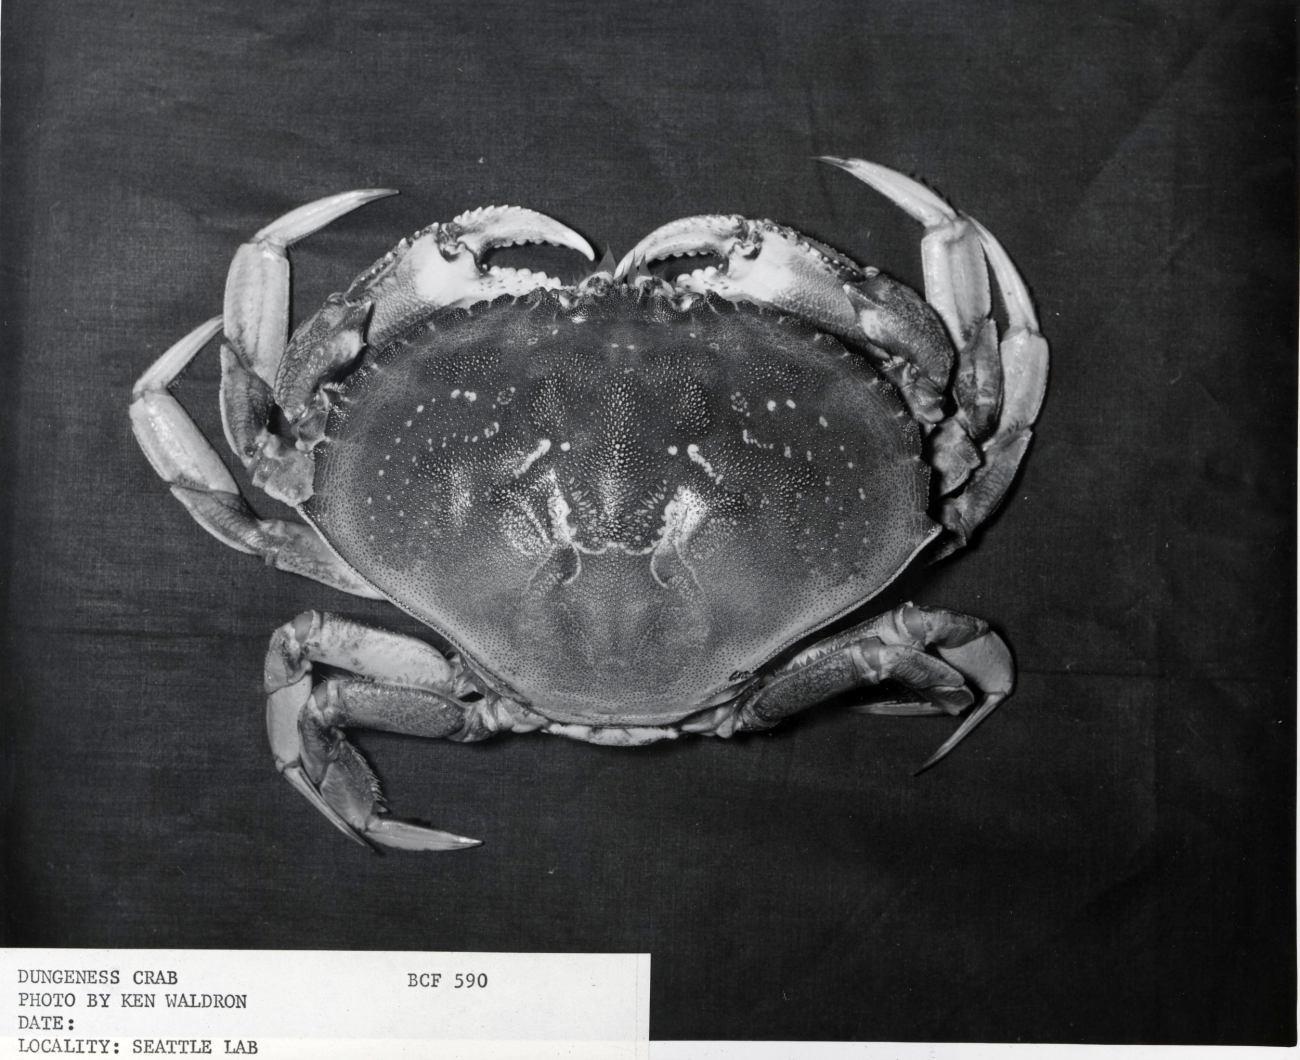 Female dungeness crab (Cancer magister)